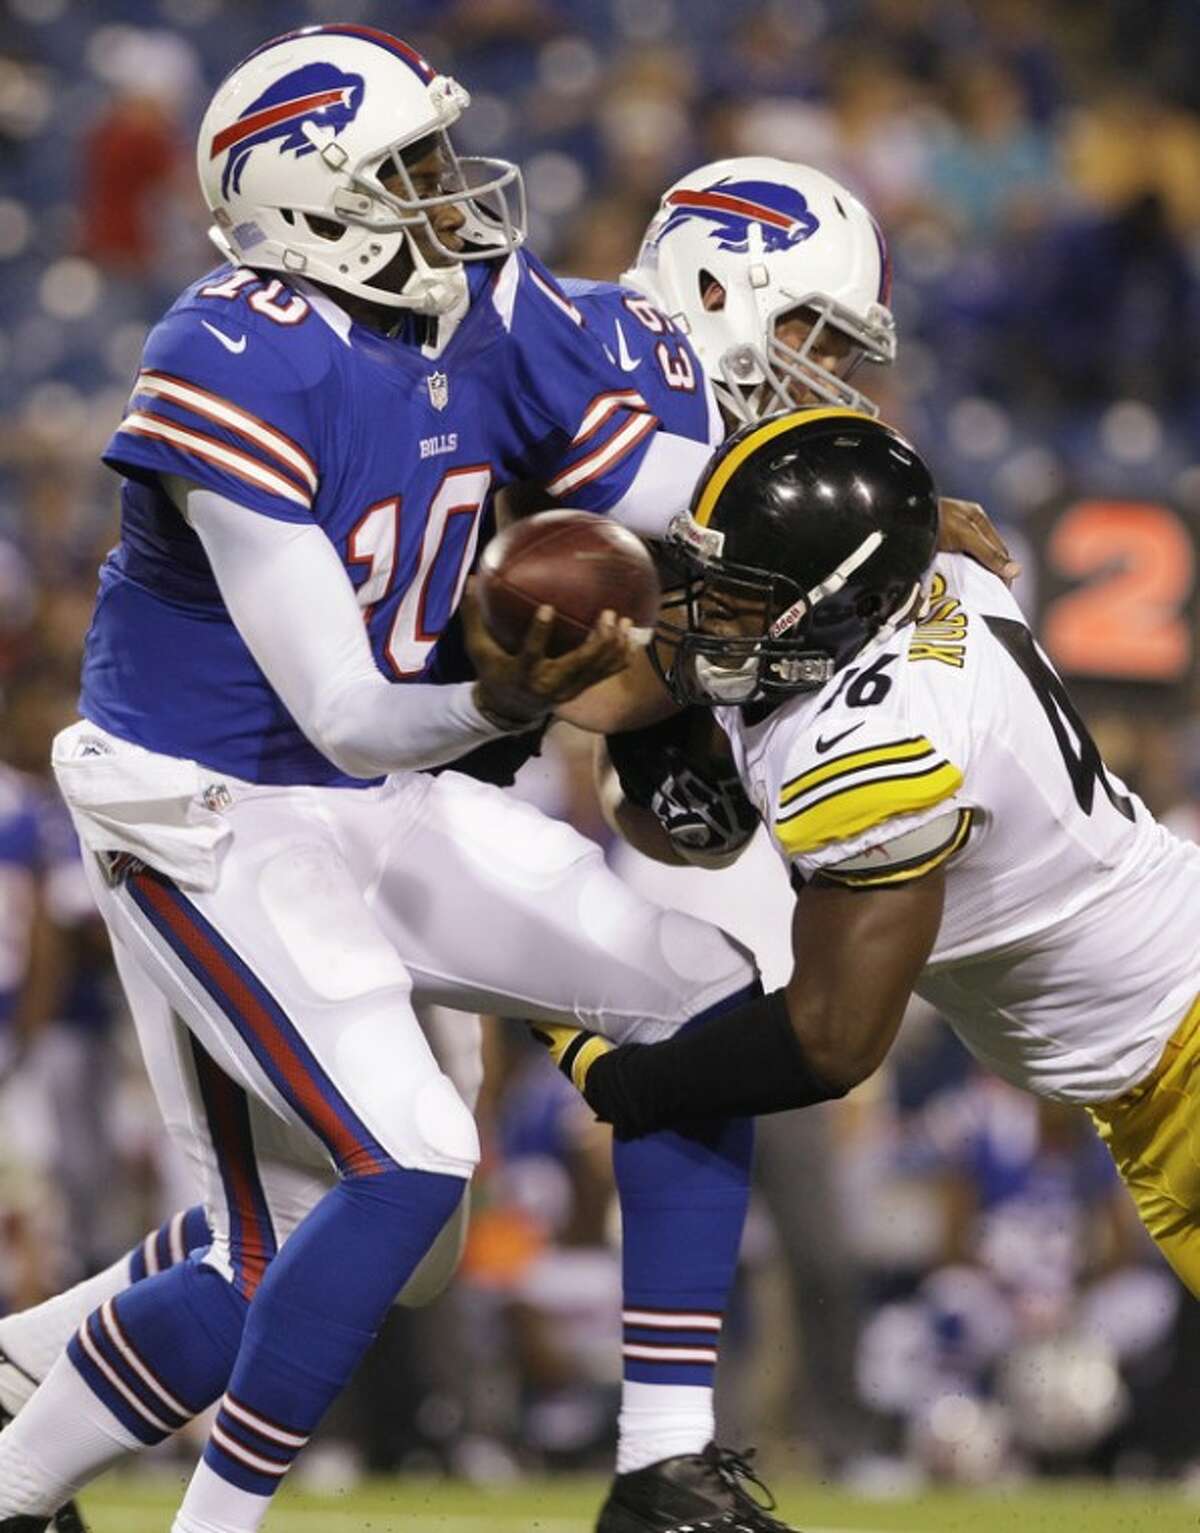 Buffalo Bills' Vince Young is pressured by Pittsburgh Steelers' Adrian Robinson (46) during the second half of a preseason NFL football game in Orchard Park, N.Y., Saturday, Aug. 25, 2012. (AP Photo/Doug Benz)